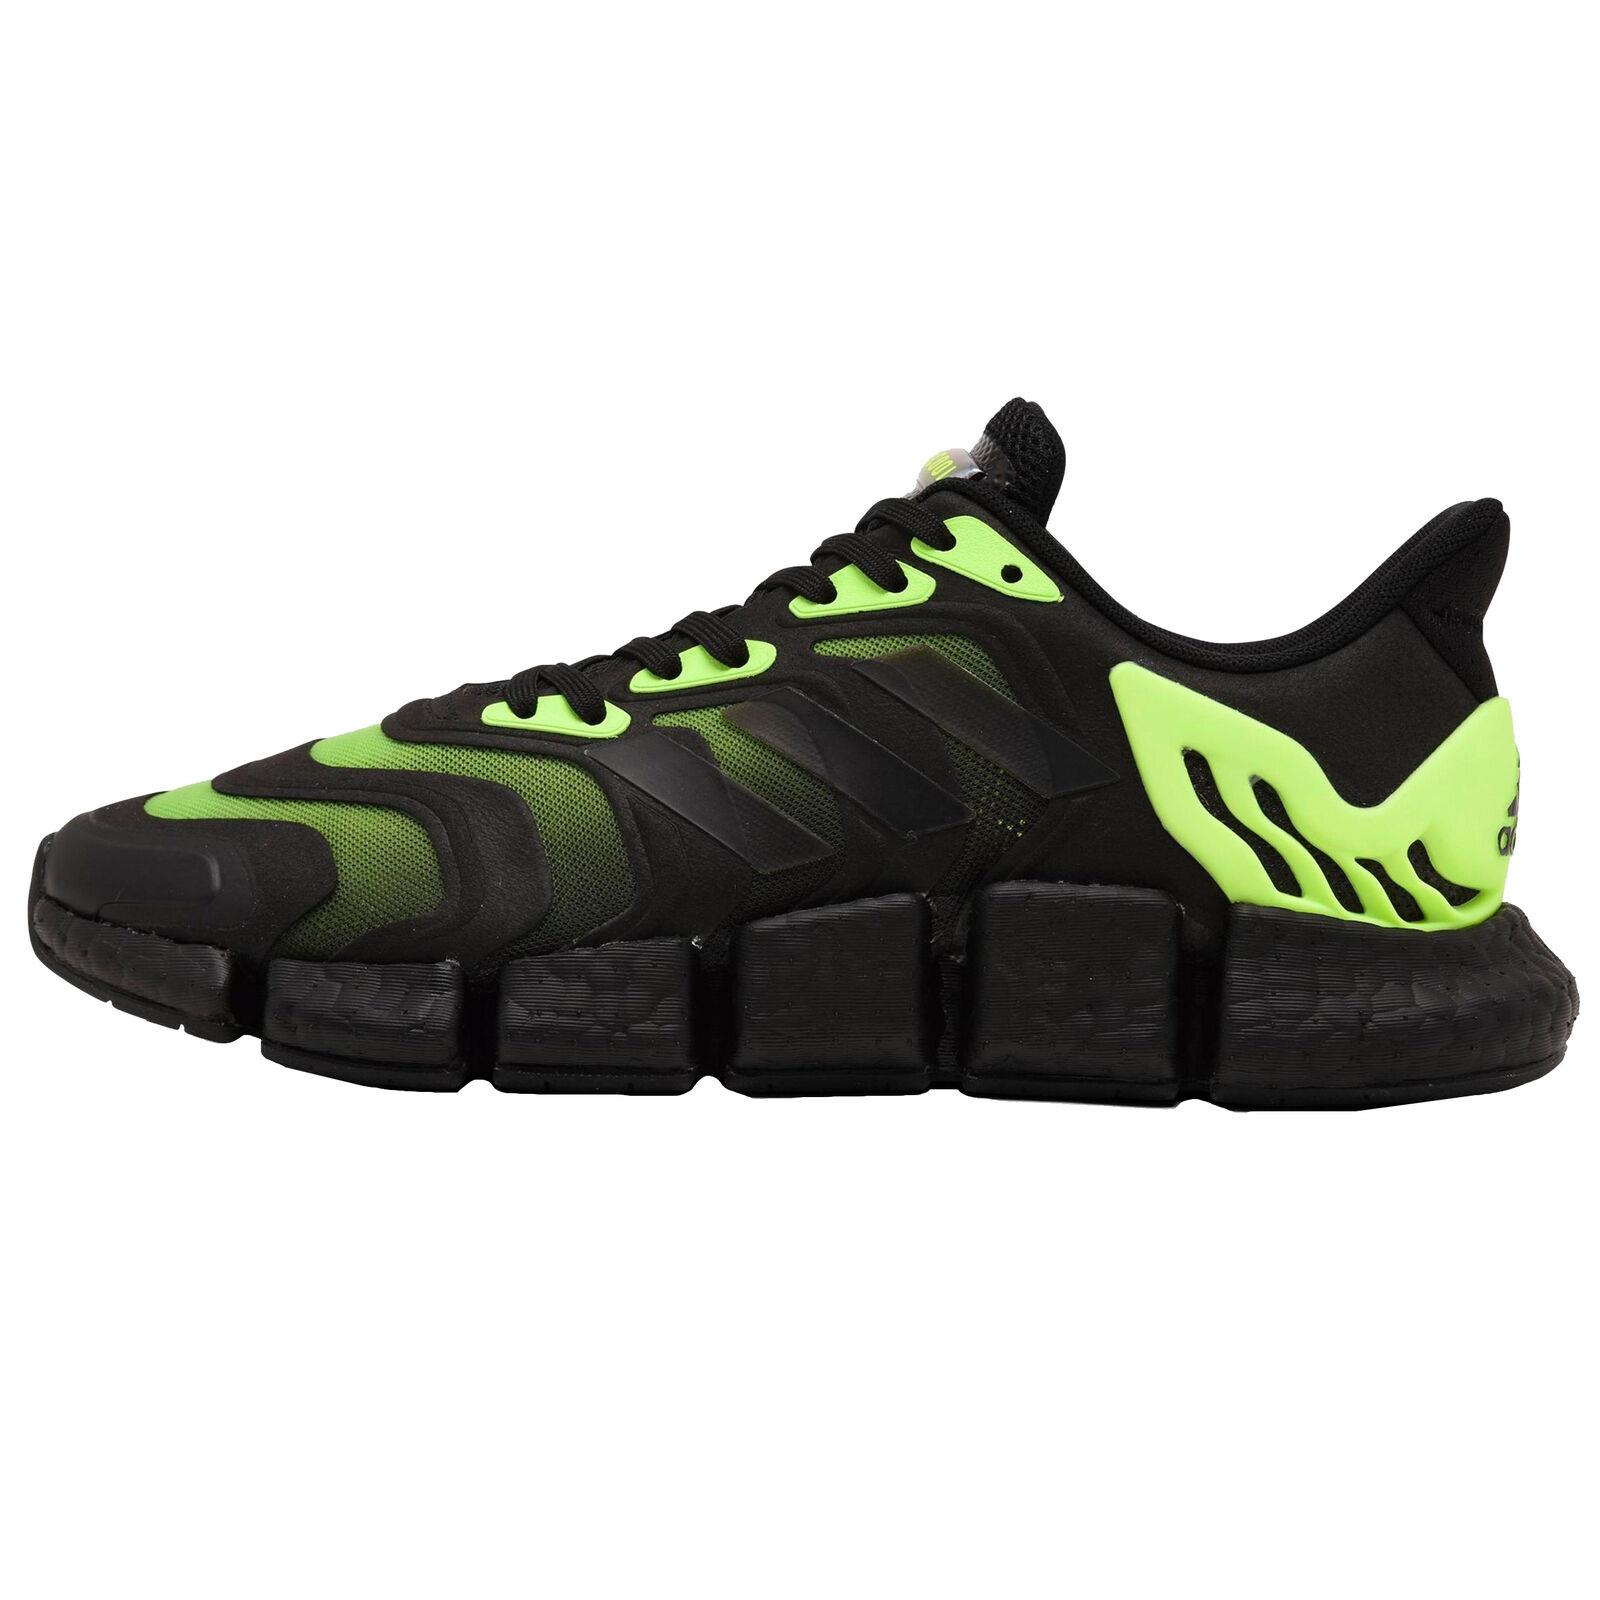 Adidas Climacool Vento Mens FZ0505 Black Signal Green Running Shoes Size 13